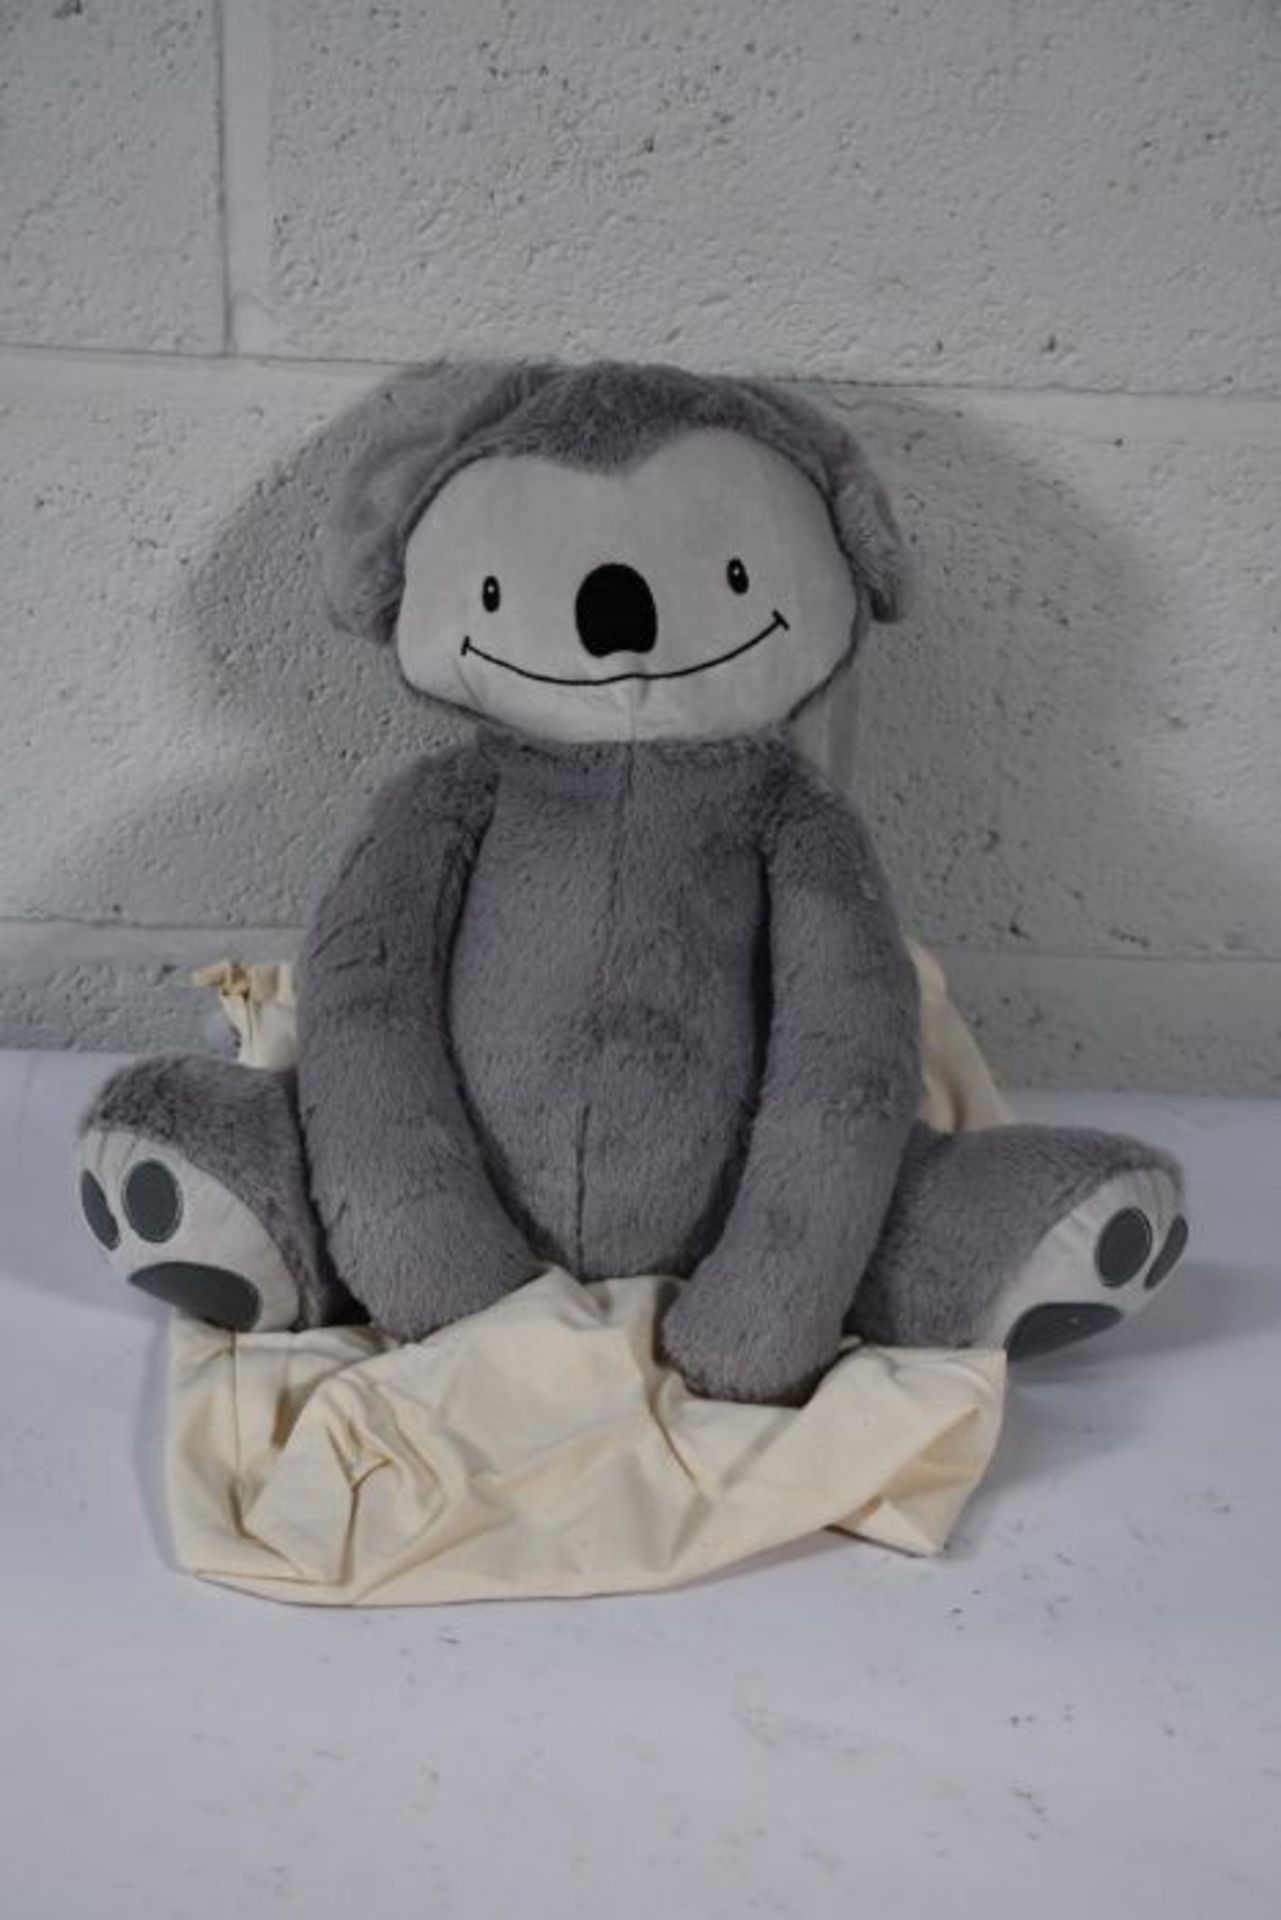 An as new Eco friendly soft 4lb custom weighted plush animal toy for Autism and anxiety